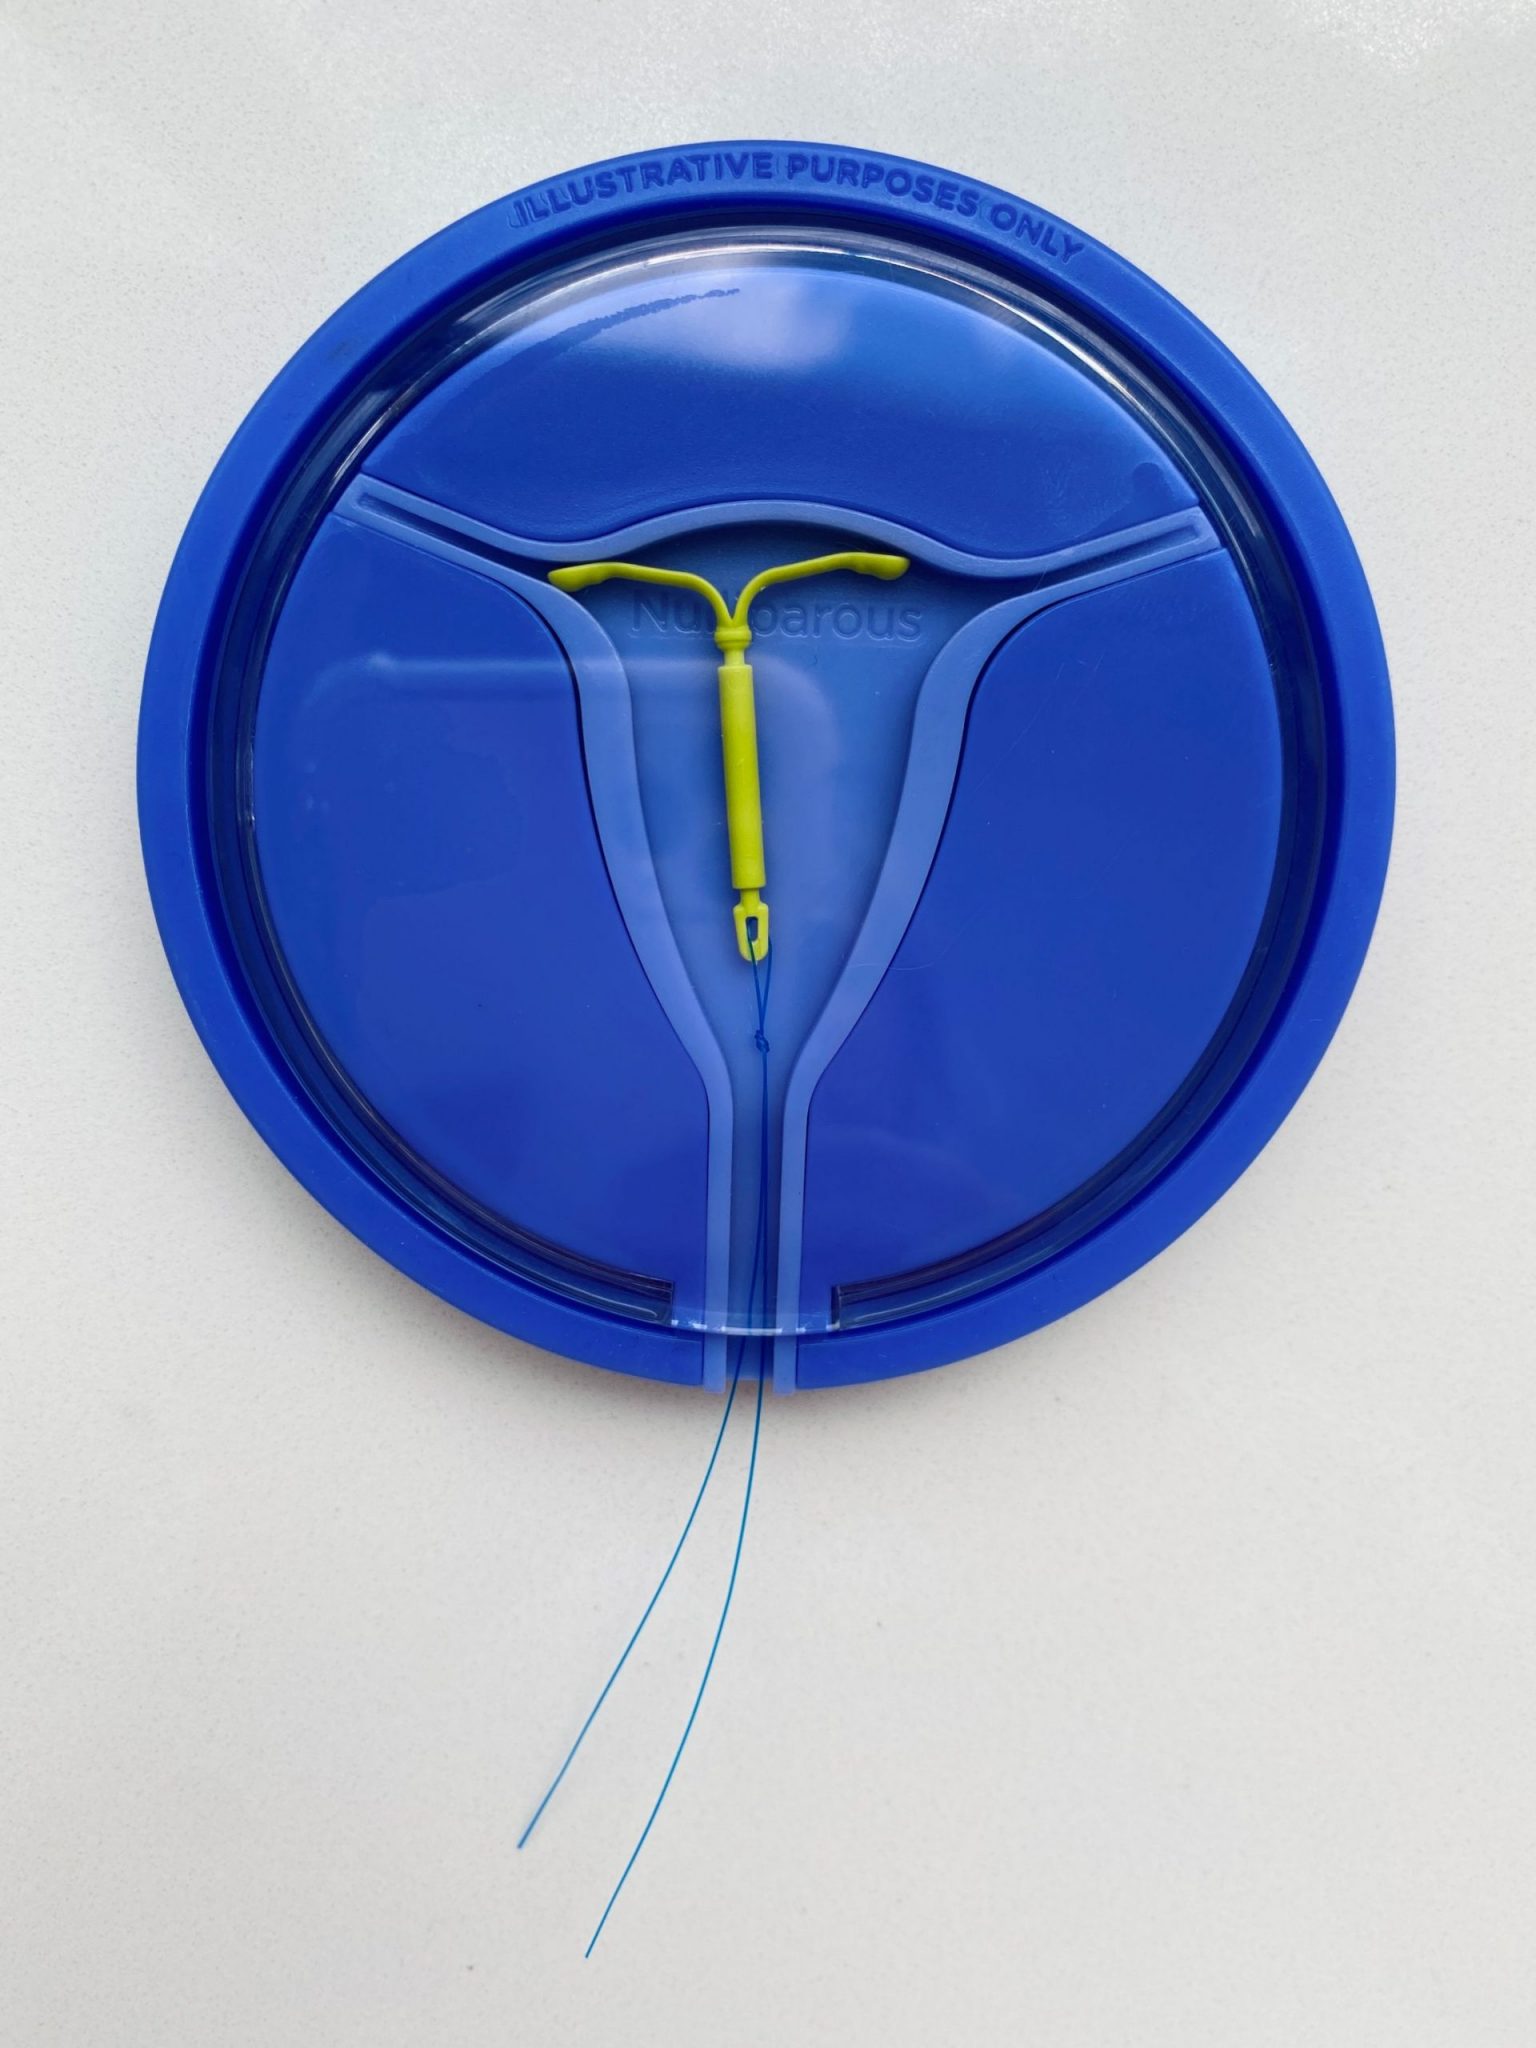 IUD insertion - example of what the IUD looks like